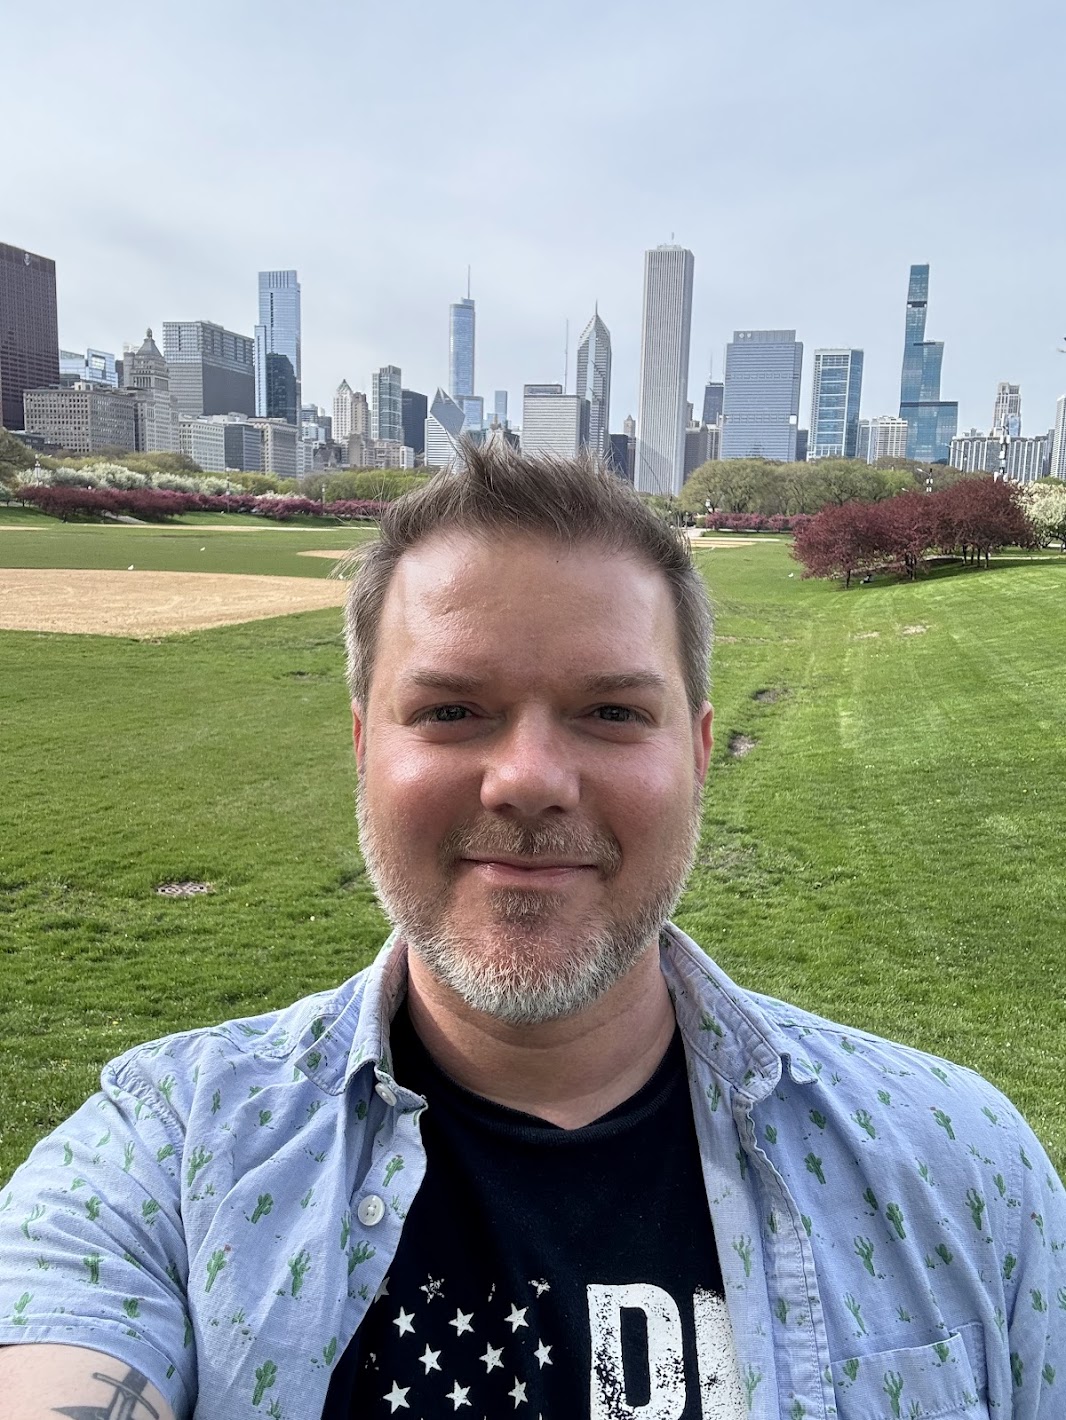 a man taking a selfie in a park with a city in the background